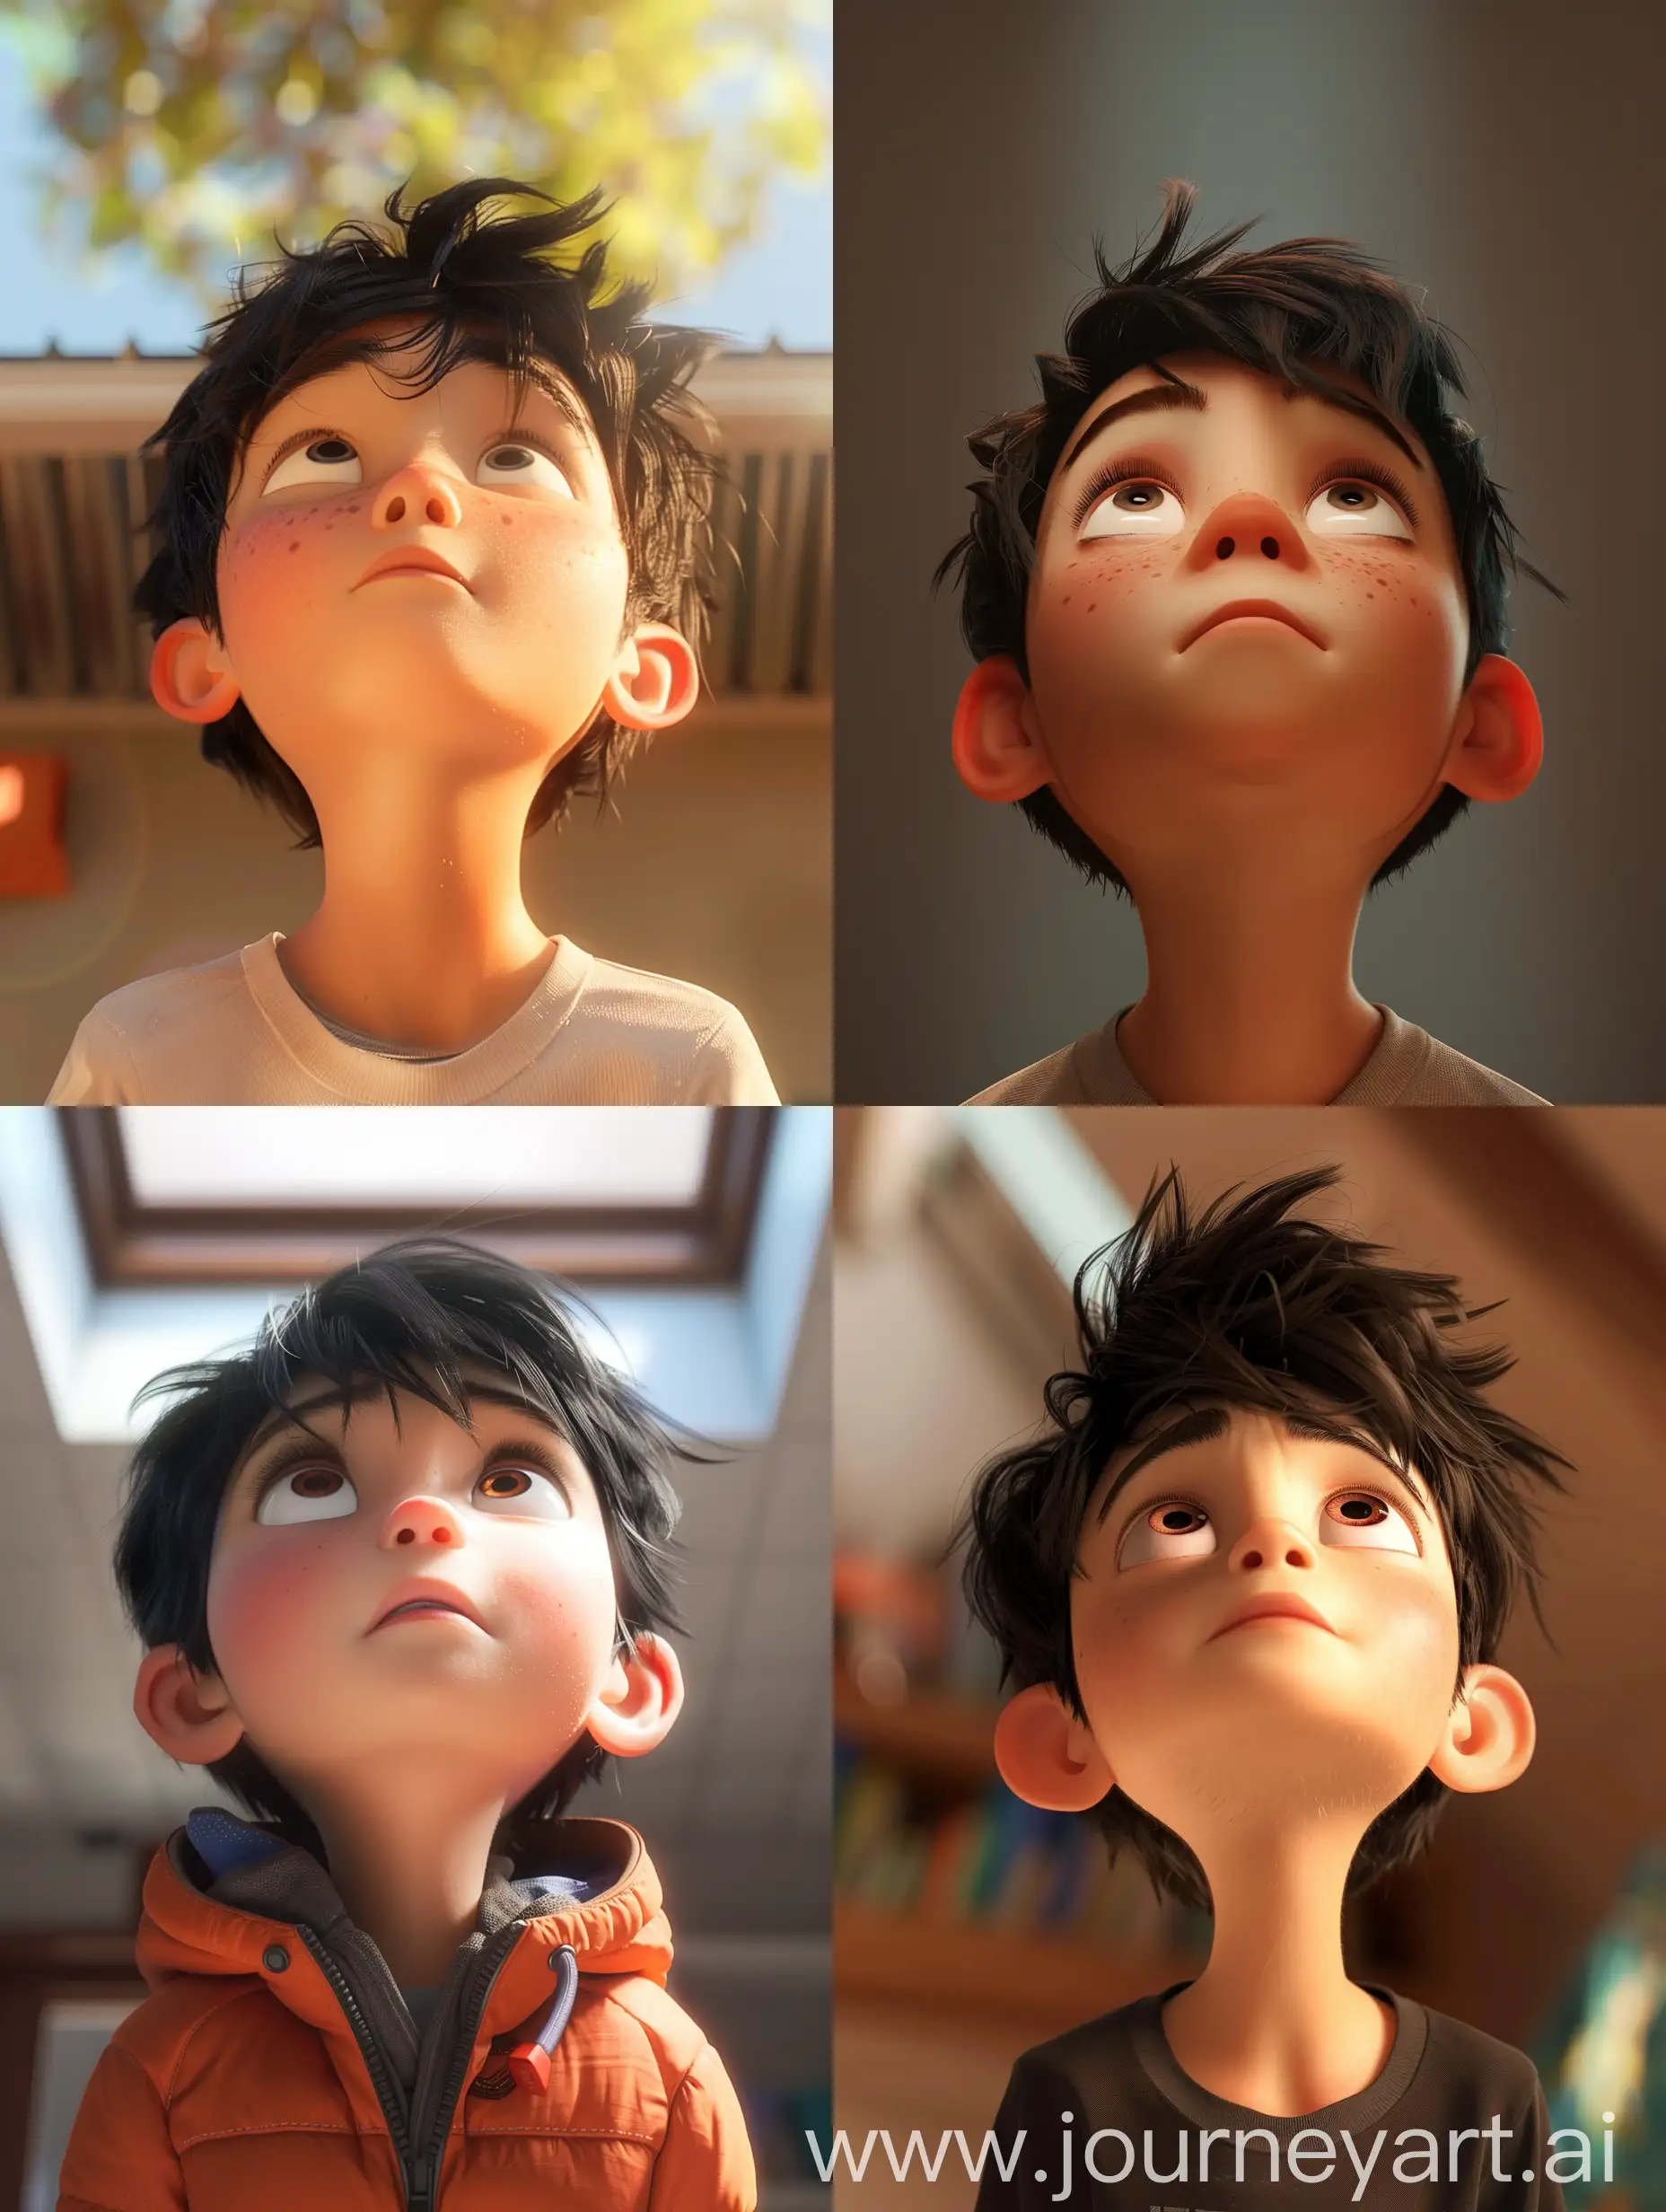 A shot of the boy character looking upwards with a determined expression, their eyes squinting slightly with focus as they envision their goals.